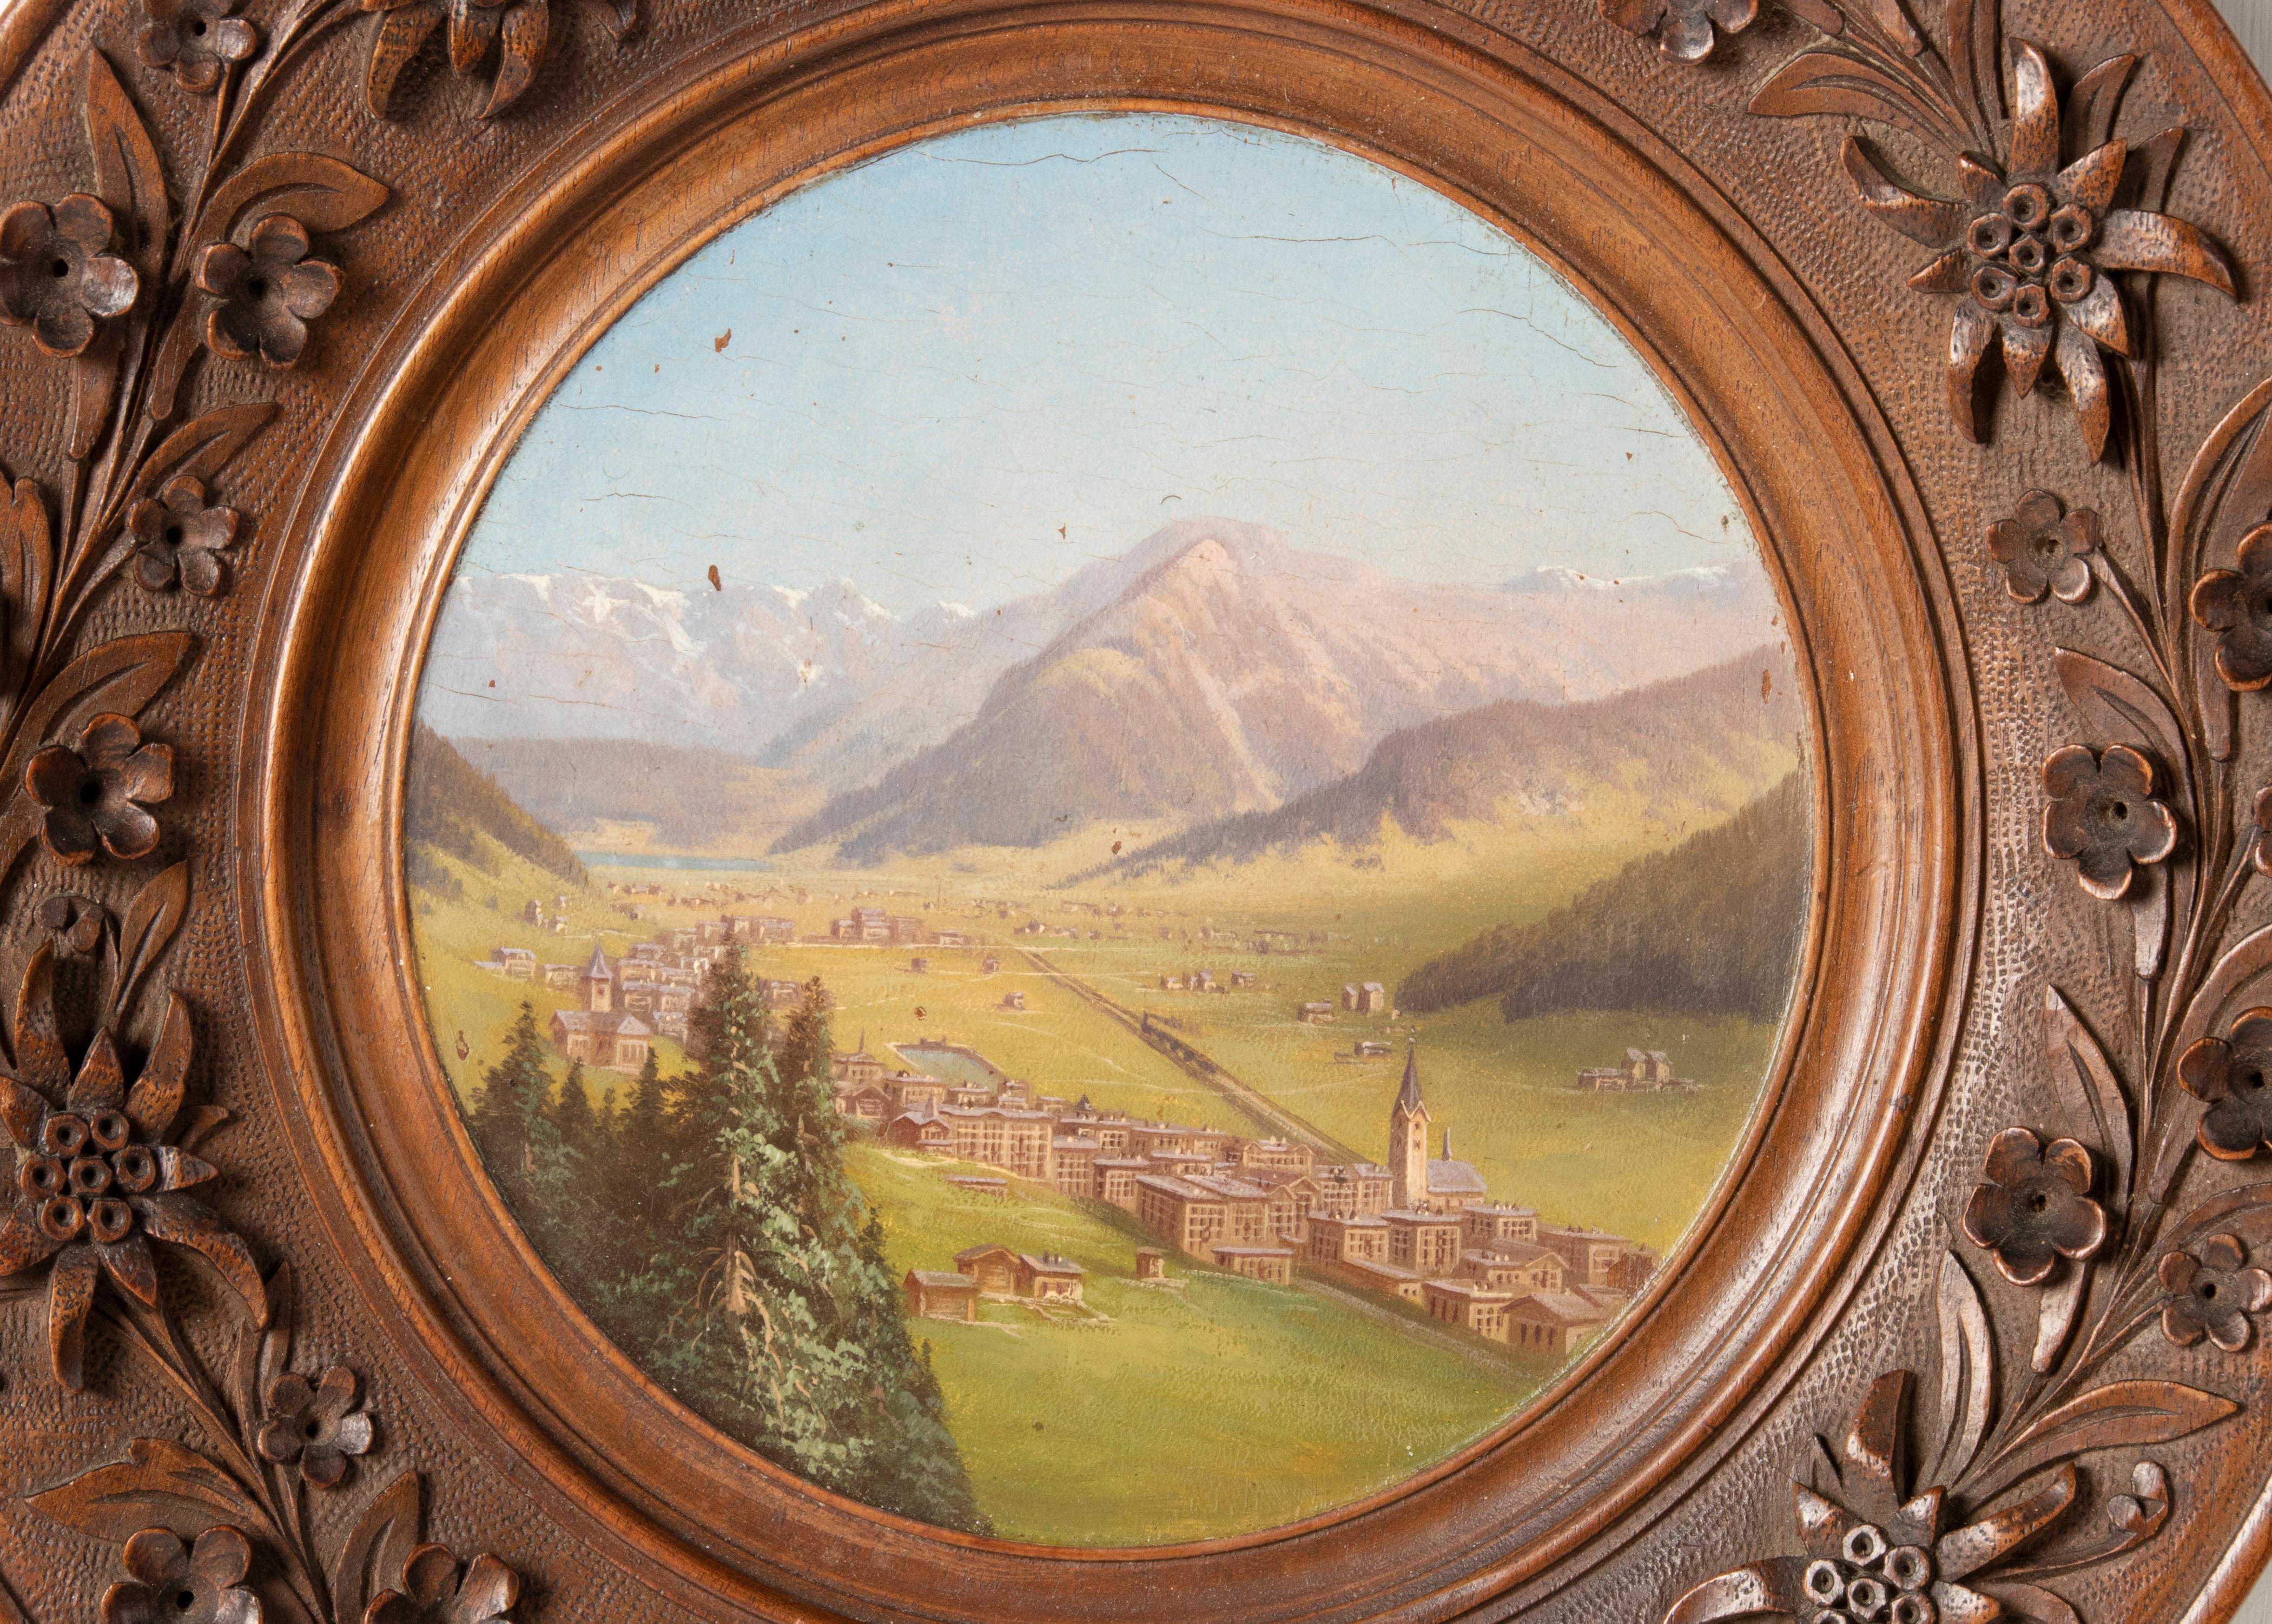 A antique painting of an alpine landscape in a wooden Black Forest frame. The painting shows a Swiss village in a valley. It is beautifully painted with soft color use. The frame is hand-carved with floral motifs, typically Black Forest.
There is a